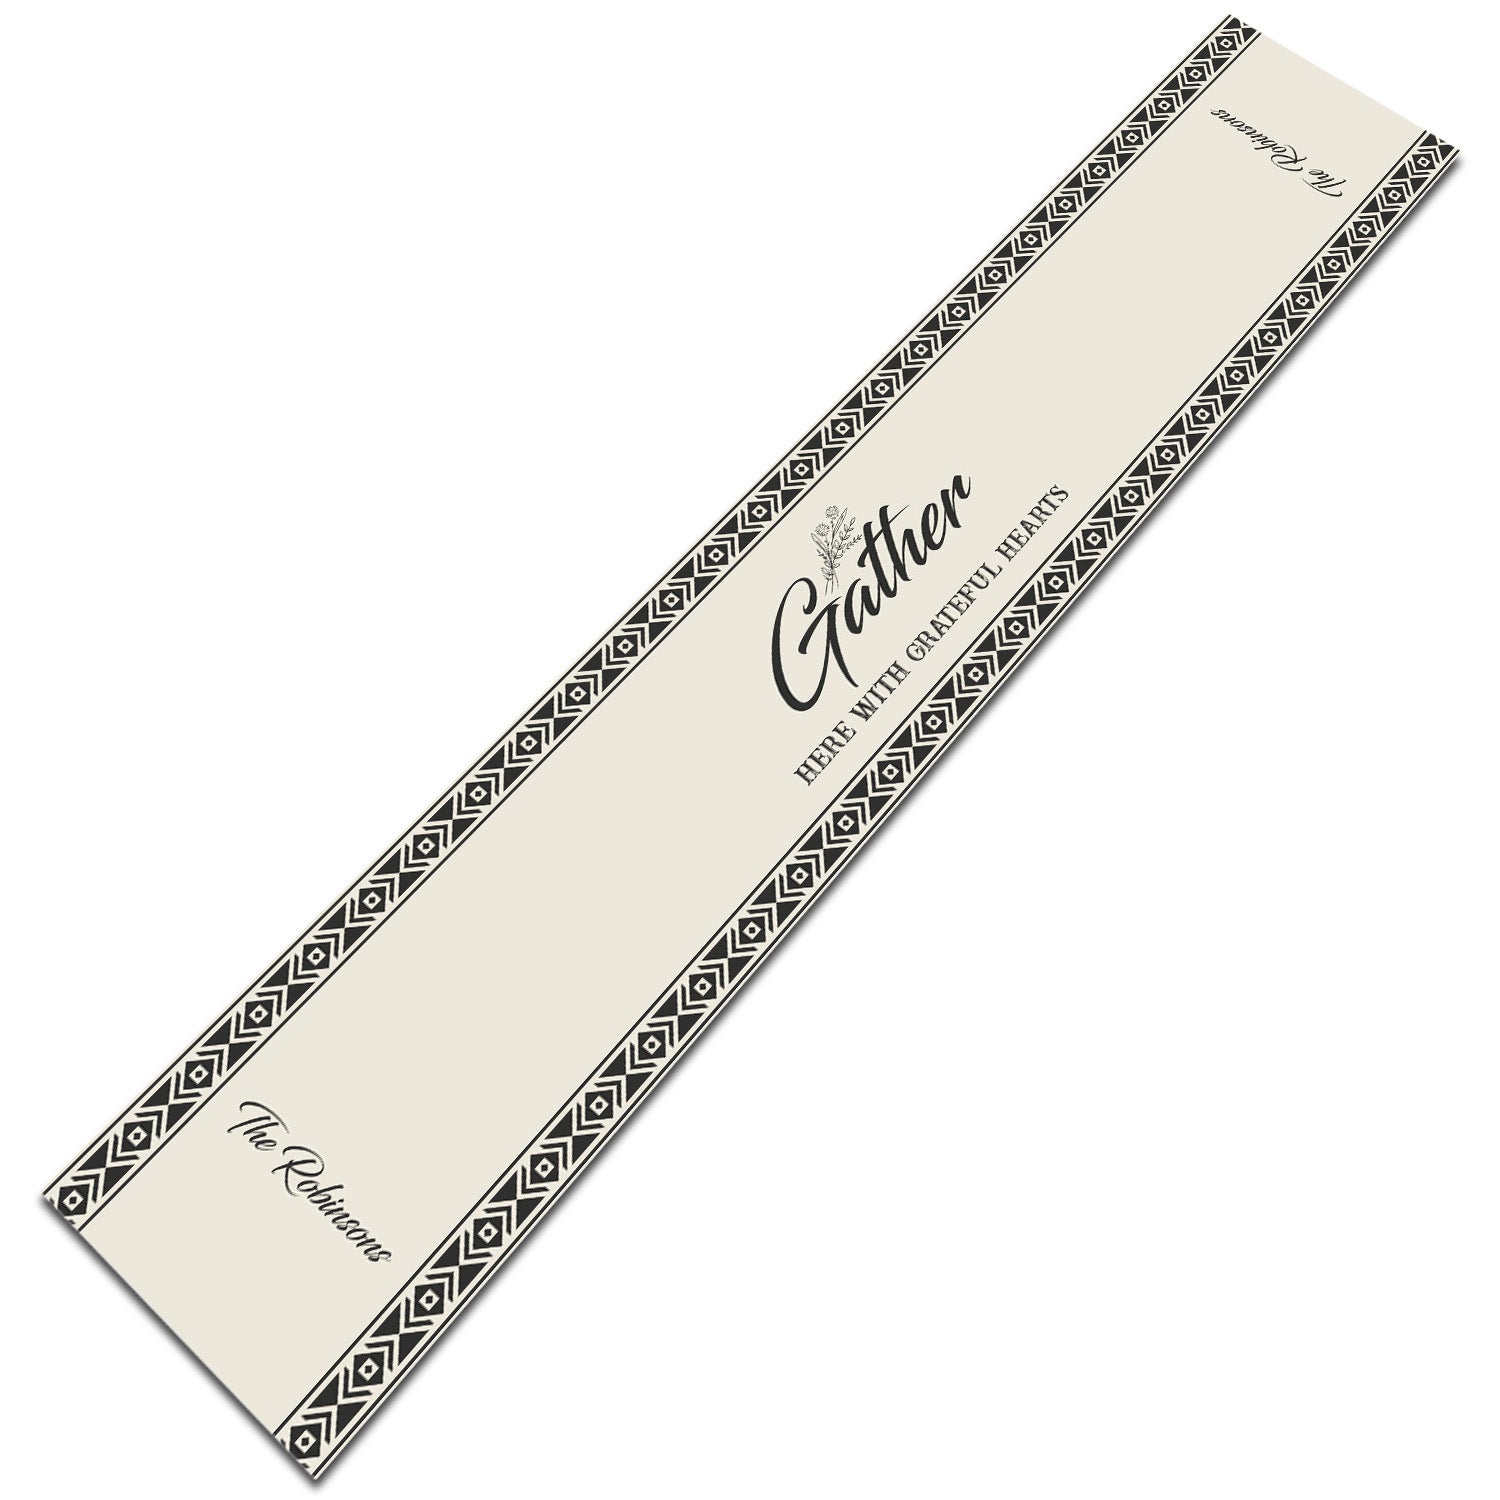 Customizable Table Runner, Custom Family Name, Gather Here With Graterful Hearts